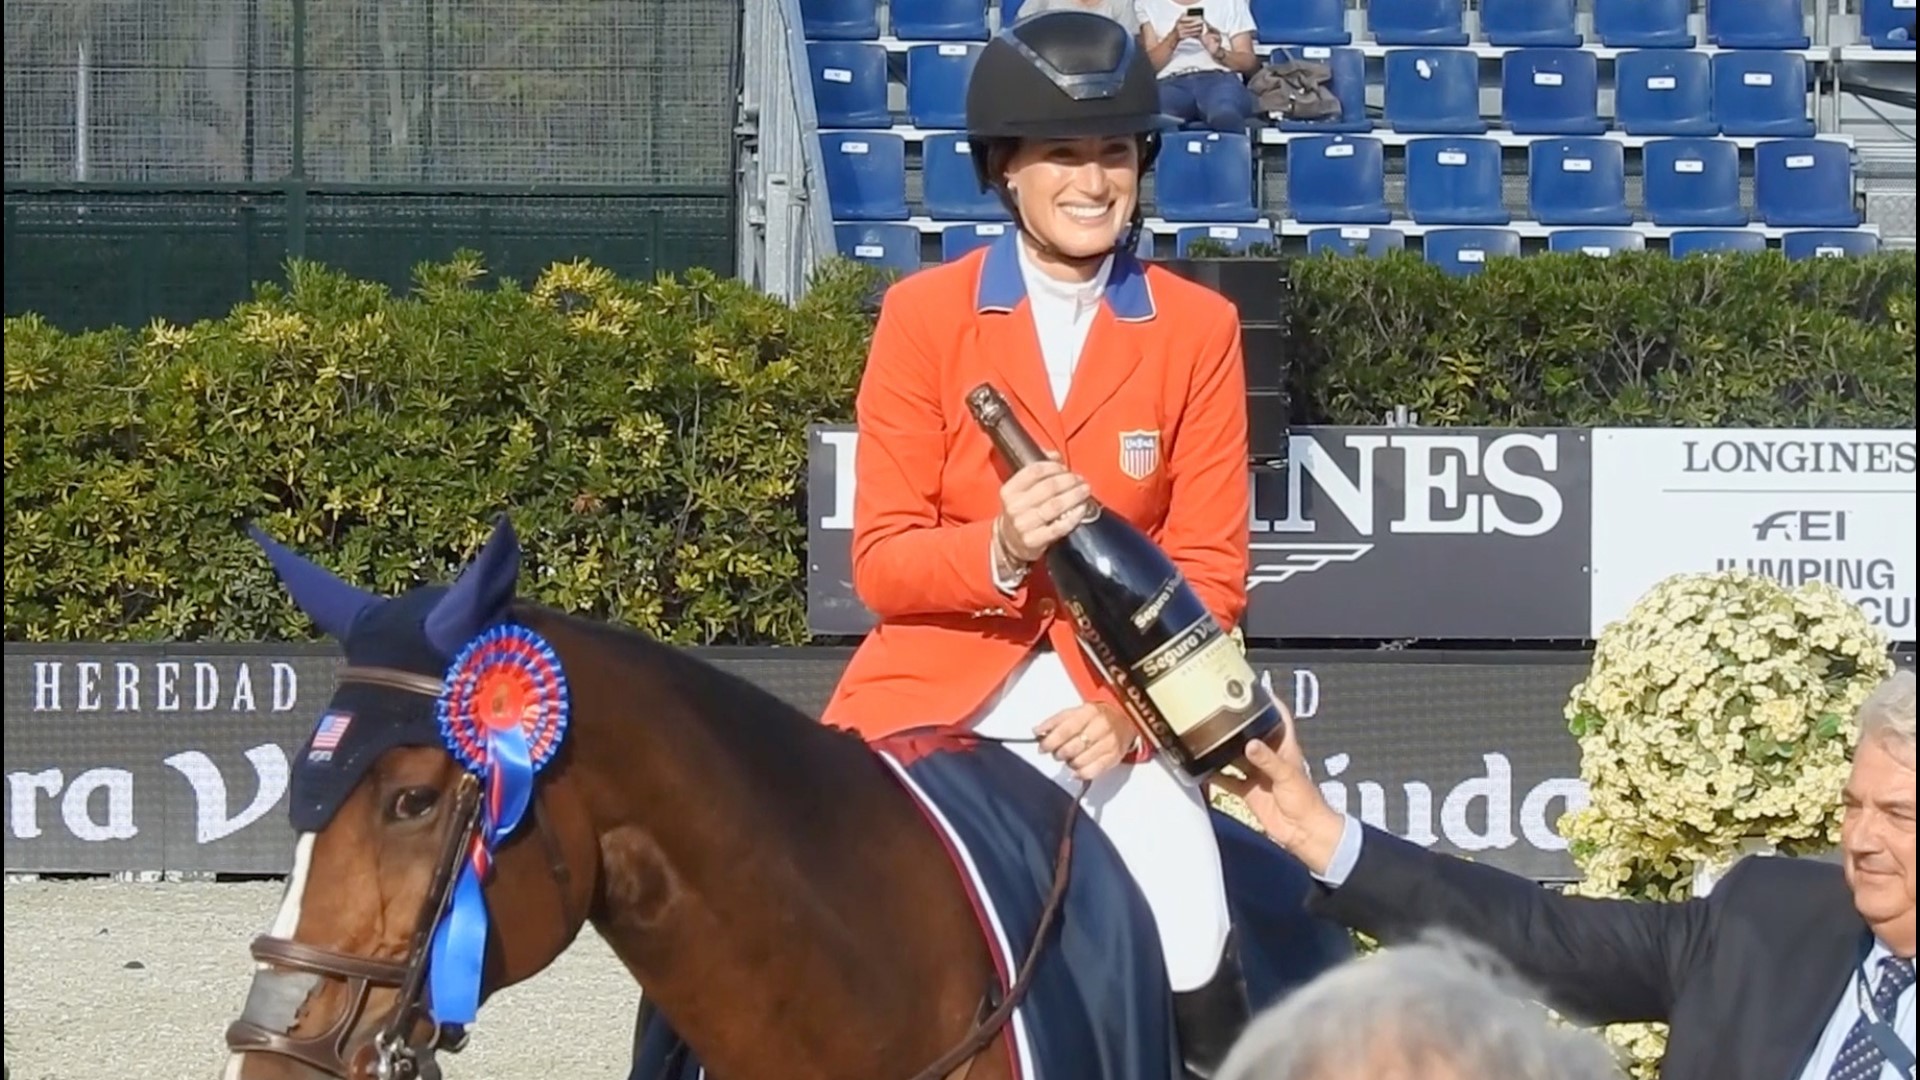 There's a new boss in town! Bruce Springsteen's daughter, Jessica Springsteen is making her Olympic debut this summer as part of Team USA in equestrian jumping. Buzz60's Chloe Hurst has the story!